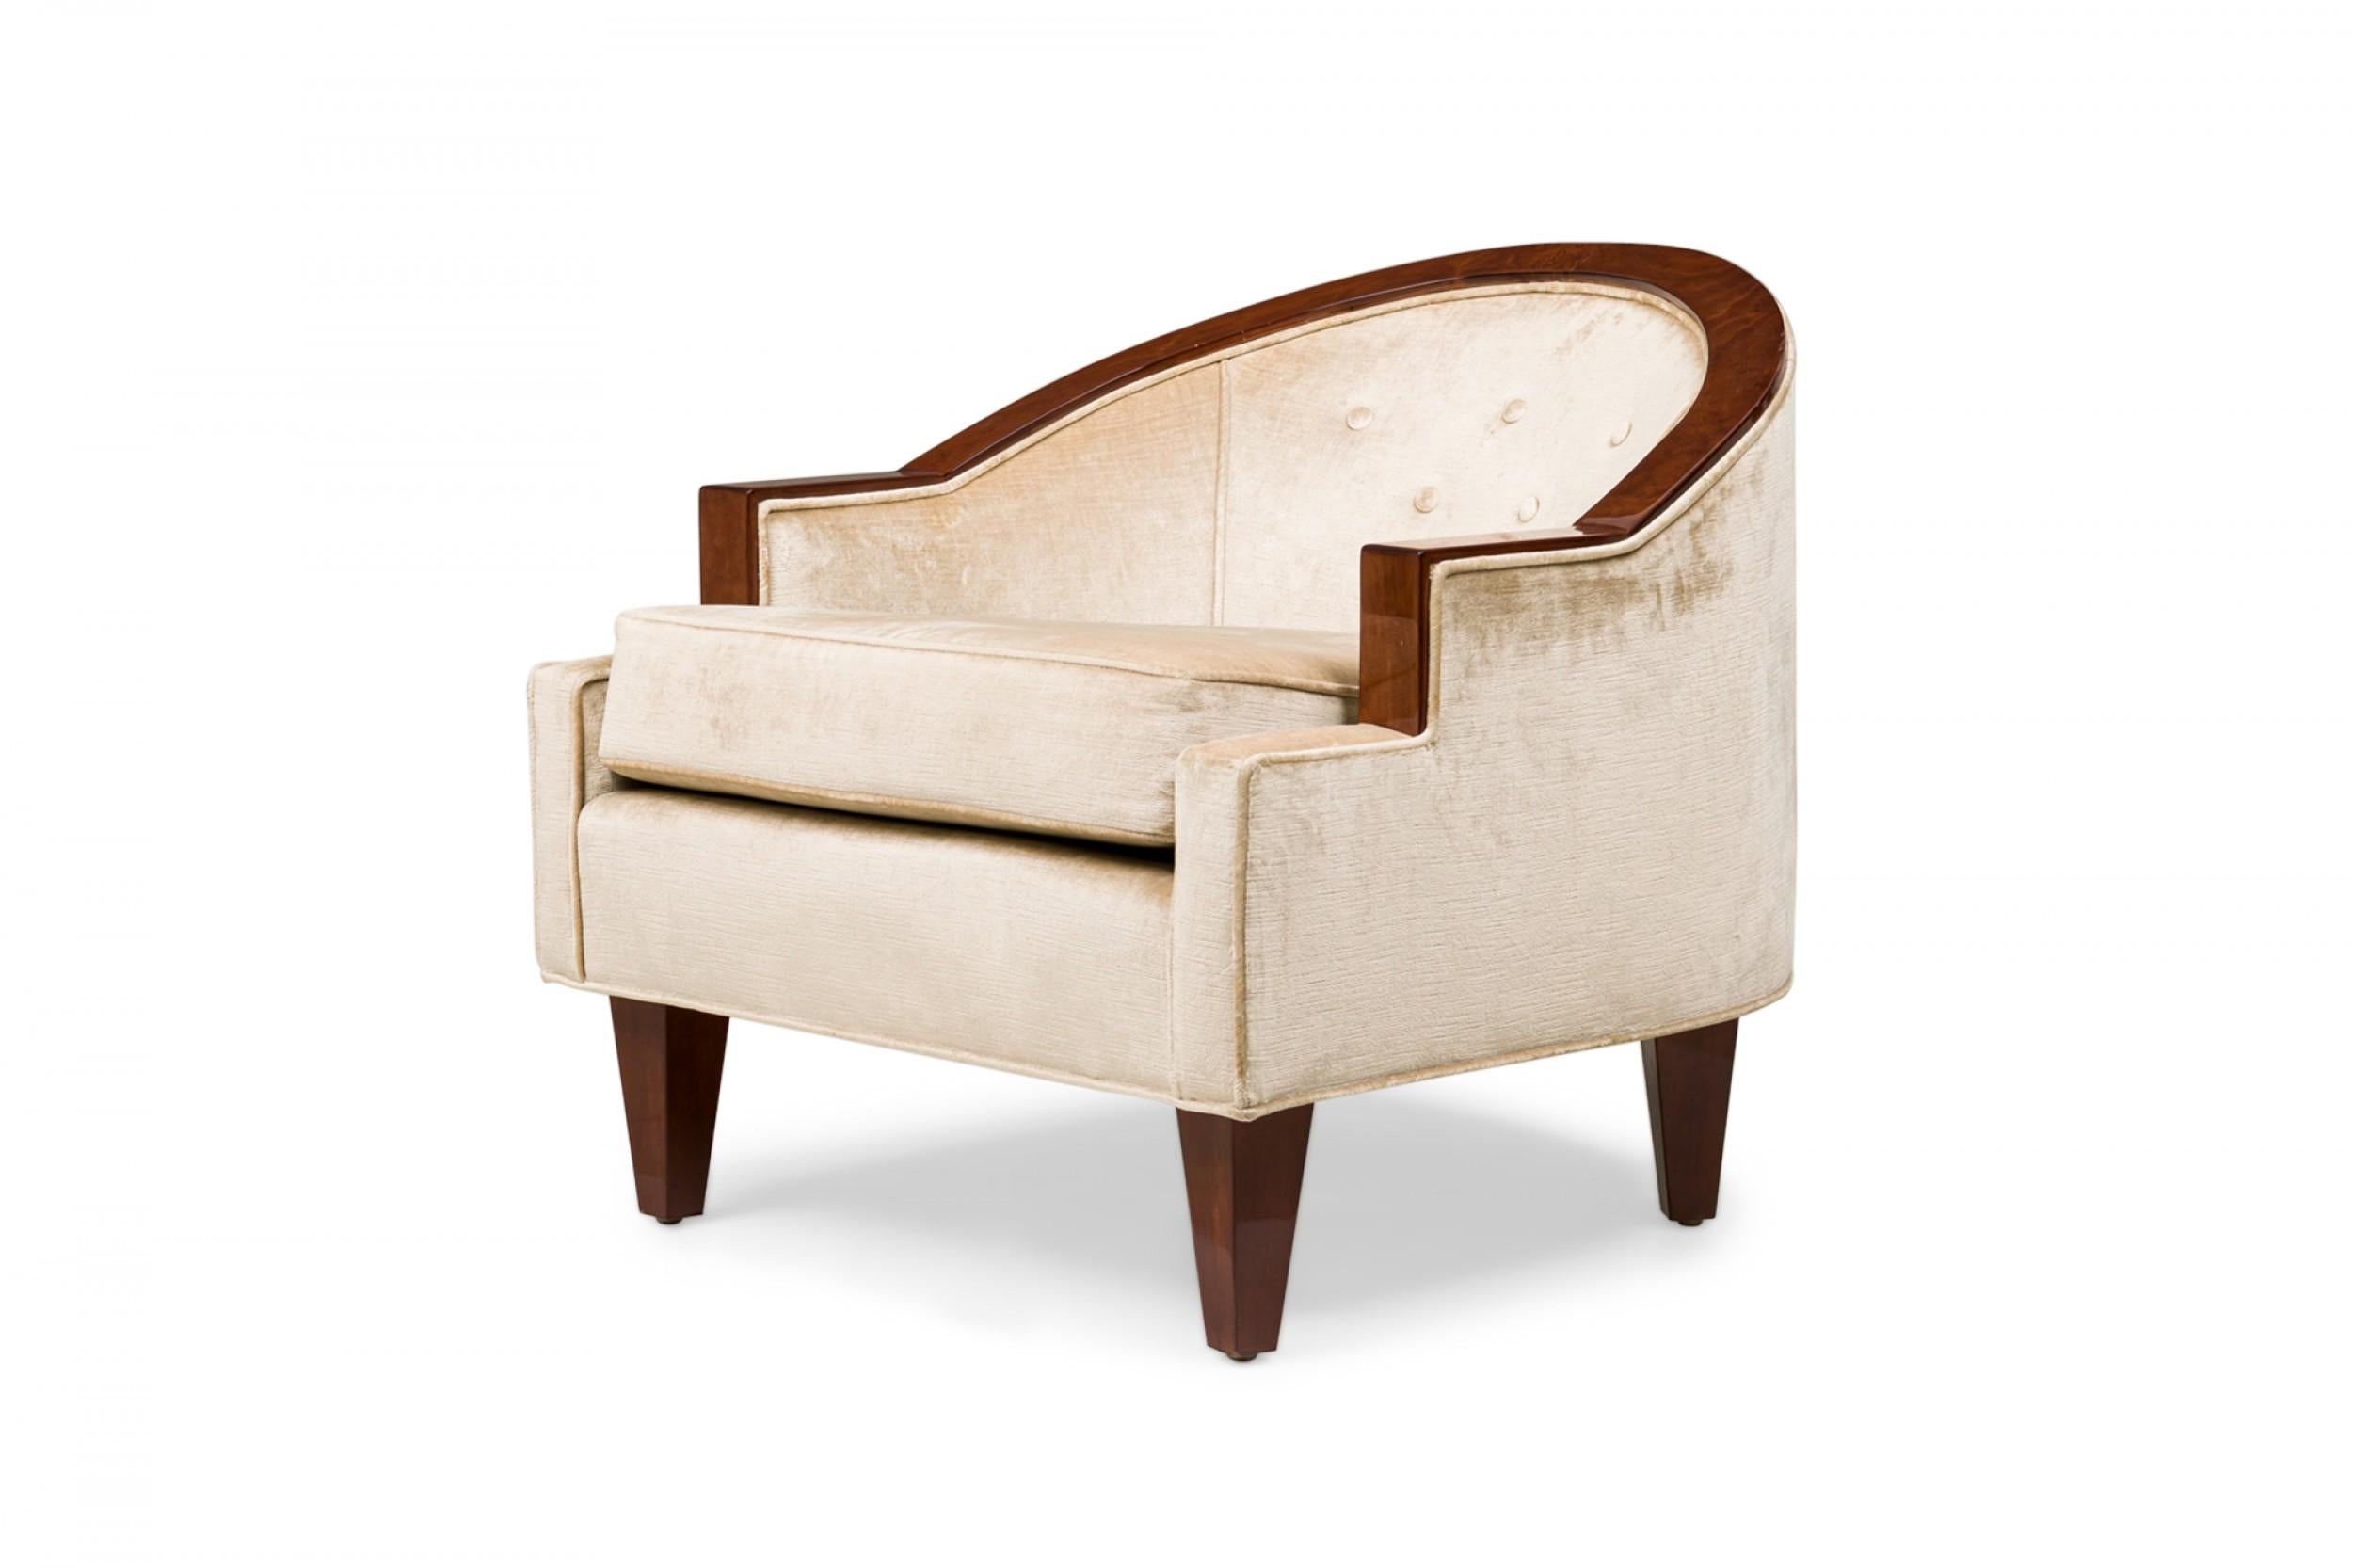 Pair of Art Deco French mahogany tub / parlor chairs in a bergère style with a low curved horseshoe back, step back arms, tufted beige upholstery in a satin finish with piping and removable seat cushion and resting on 4 tapered square legs (PRICED